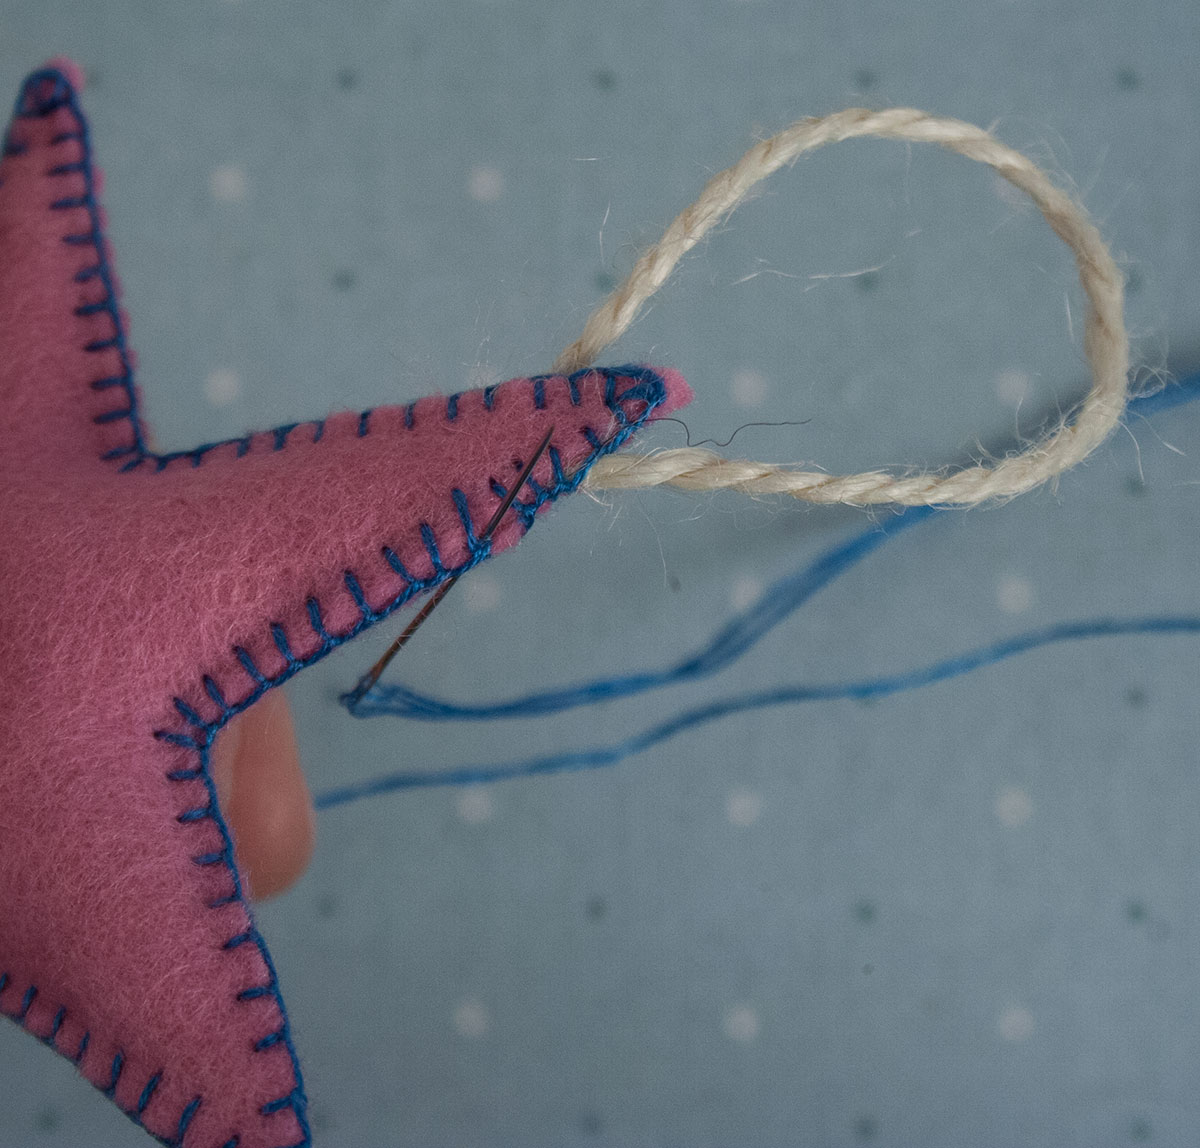 How to Make a Wool Felt Star Ornament - Free Sewing Tutorial - Points and  Inside Corners — Oliver Rabbit